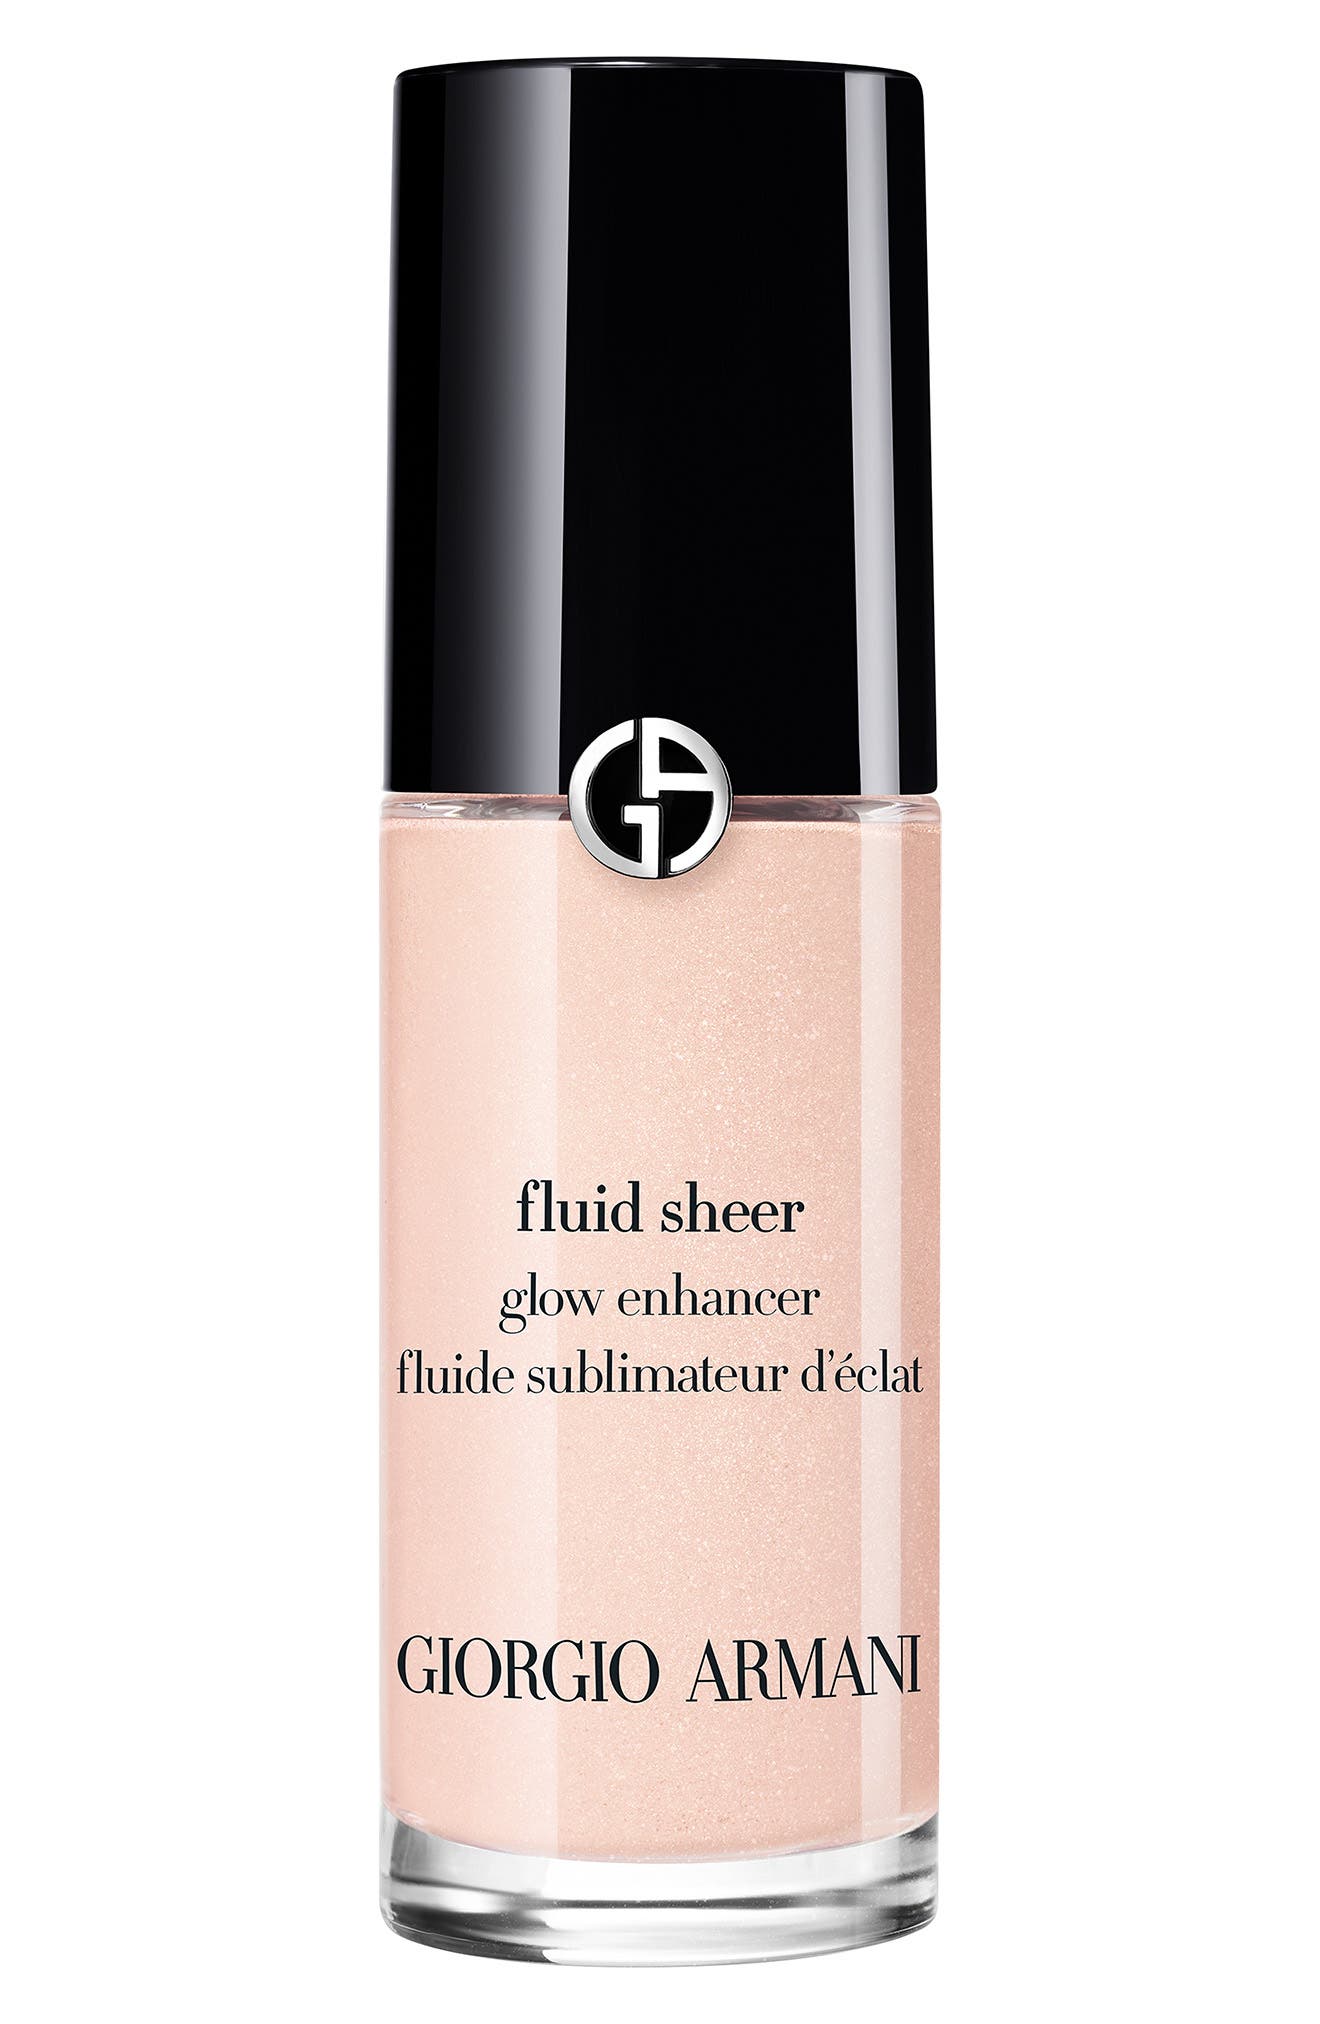 Giorgio Armani Fluid Sheer Glow Enhancer Liquid Highlighter, Bronzer & Blush in 07 Pink Pearl at Nordstrom, Size 0.6 Oz